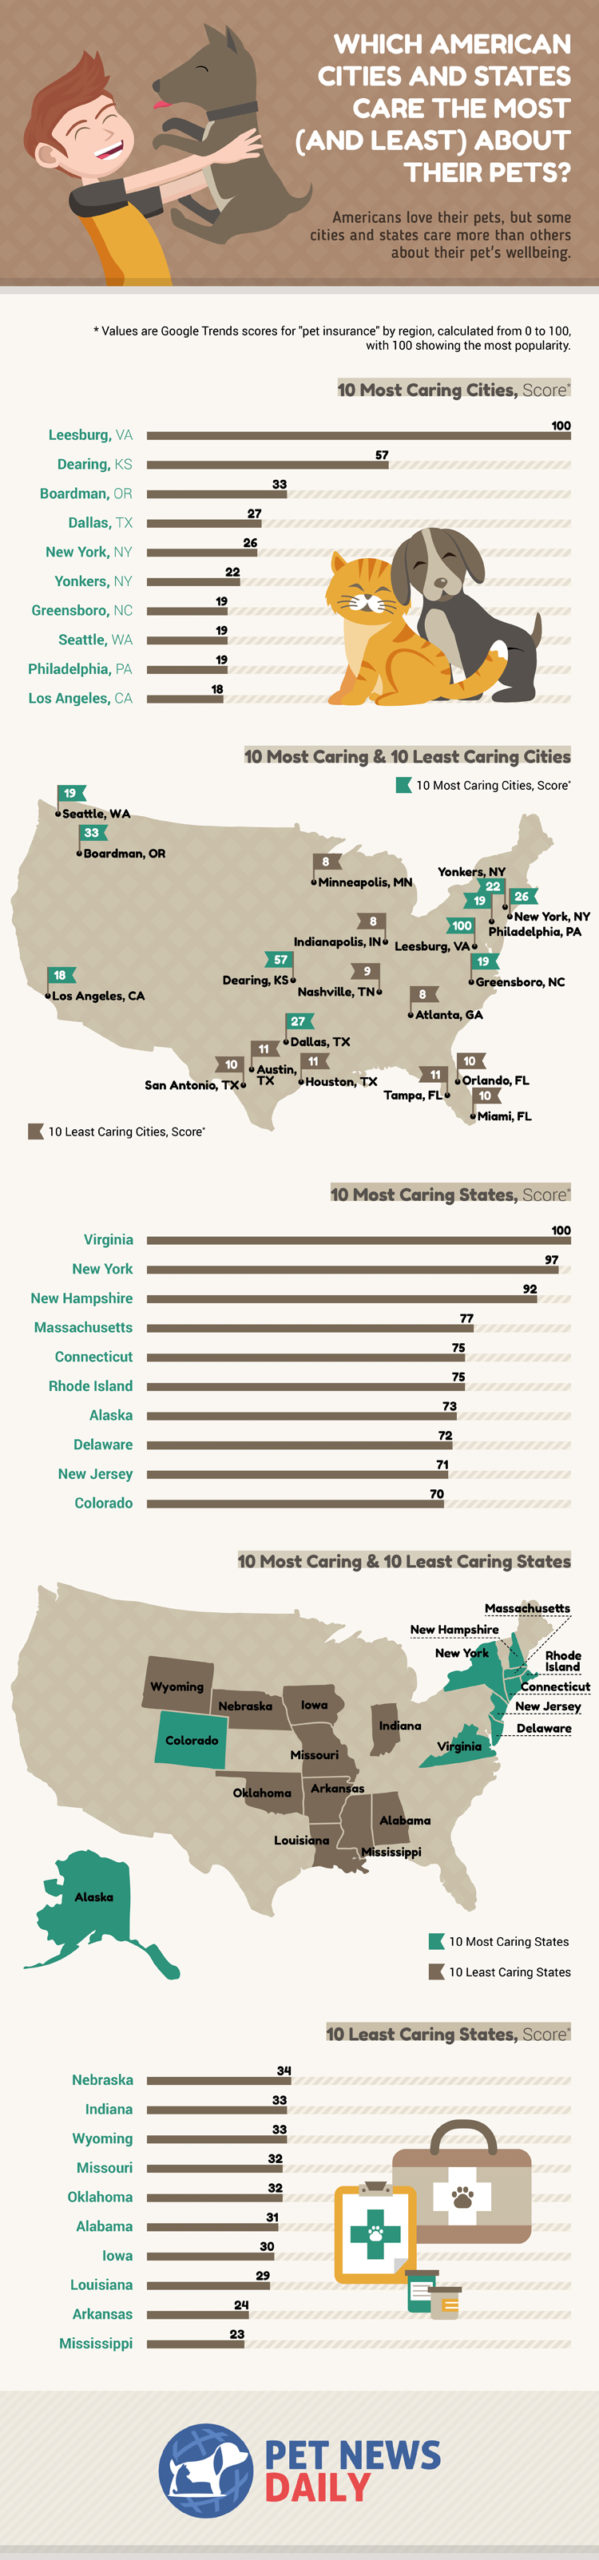 Infographic showing which American cities and states care the most and least about their pets